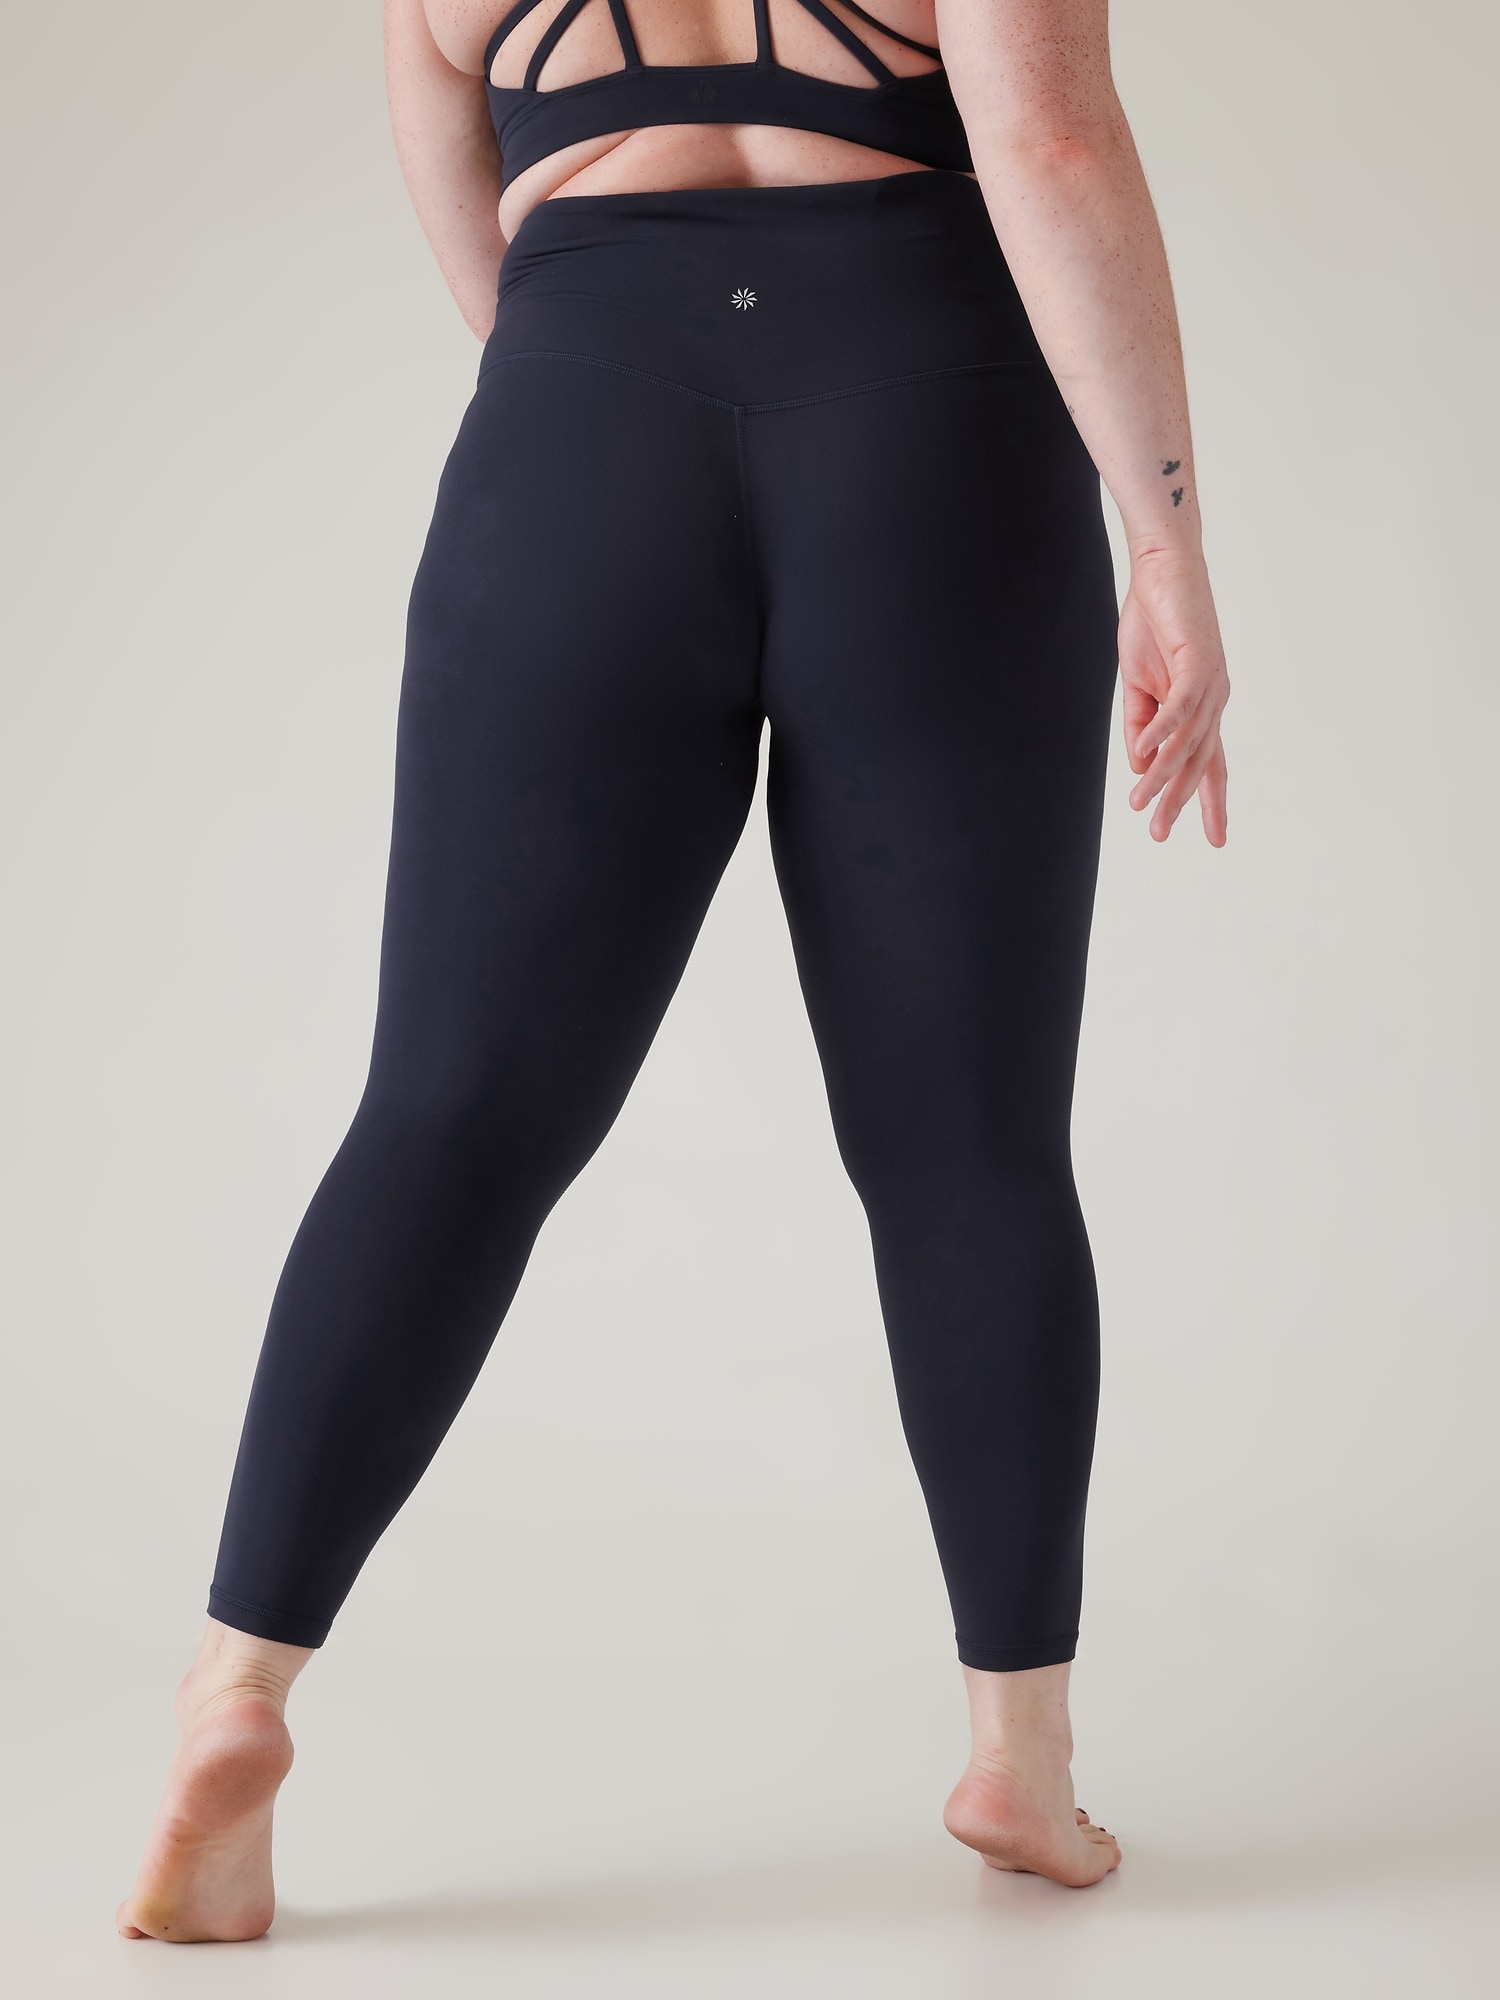 Men's, Women's and Kid's Outlet Online  Stirling Sports - Navy Elevate  Seamless Tights